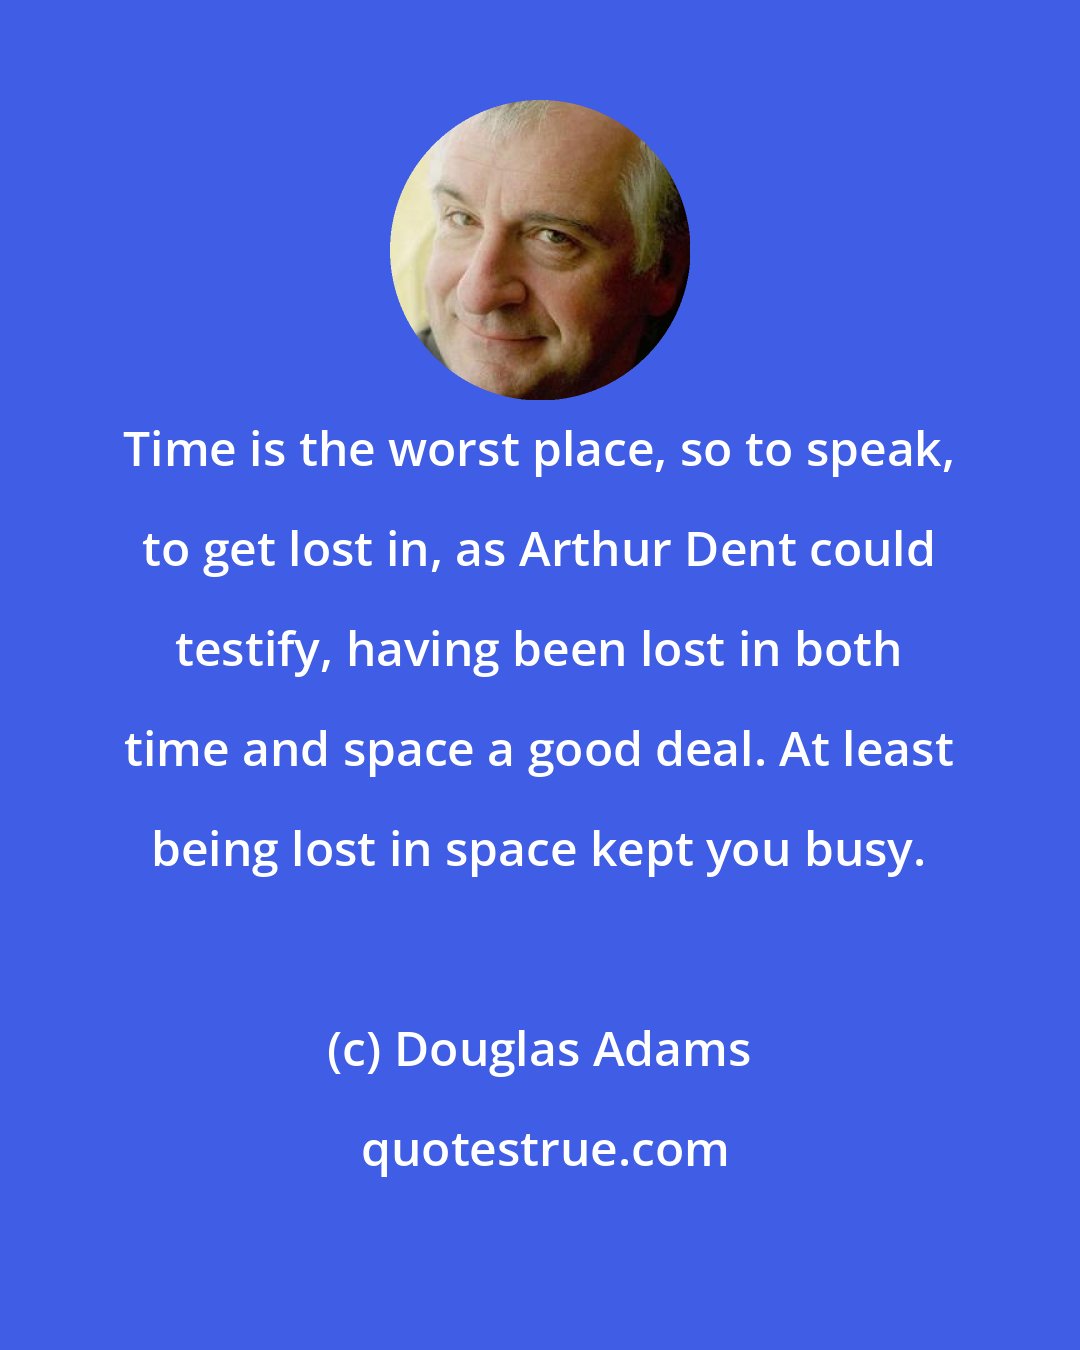 Douglas Adams: Time is the worst place, so to speak, to get lost in, as Arthur Dent could testify, having been lost in both time and space a good deal. At least being lost in space kept you busy.